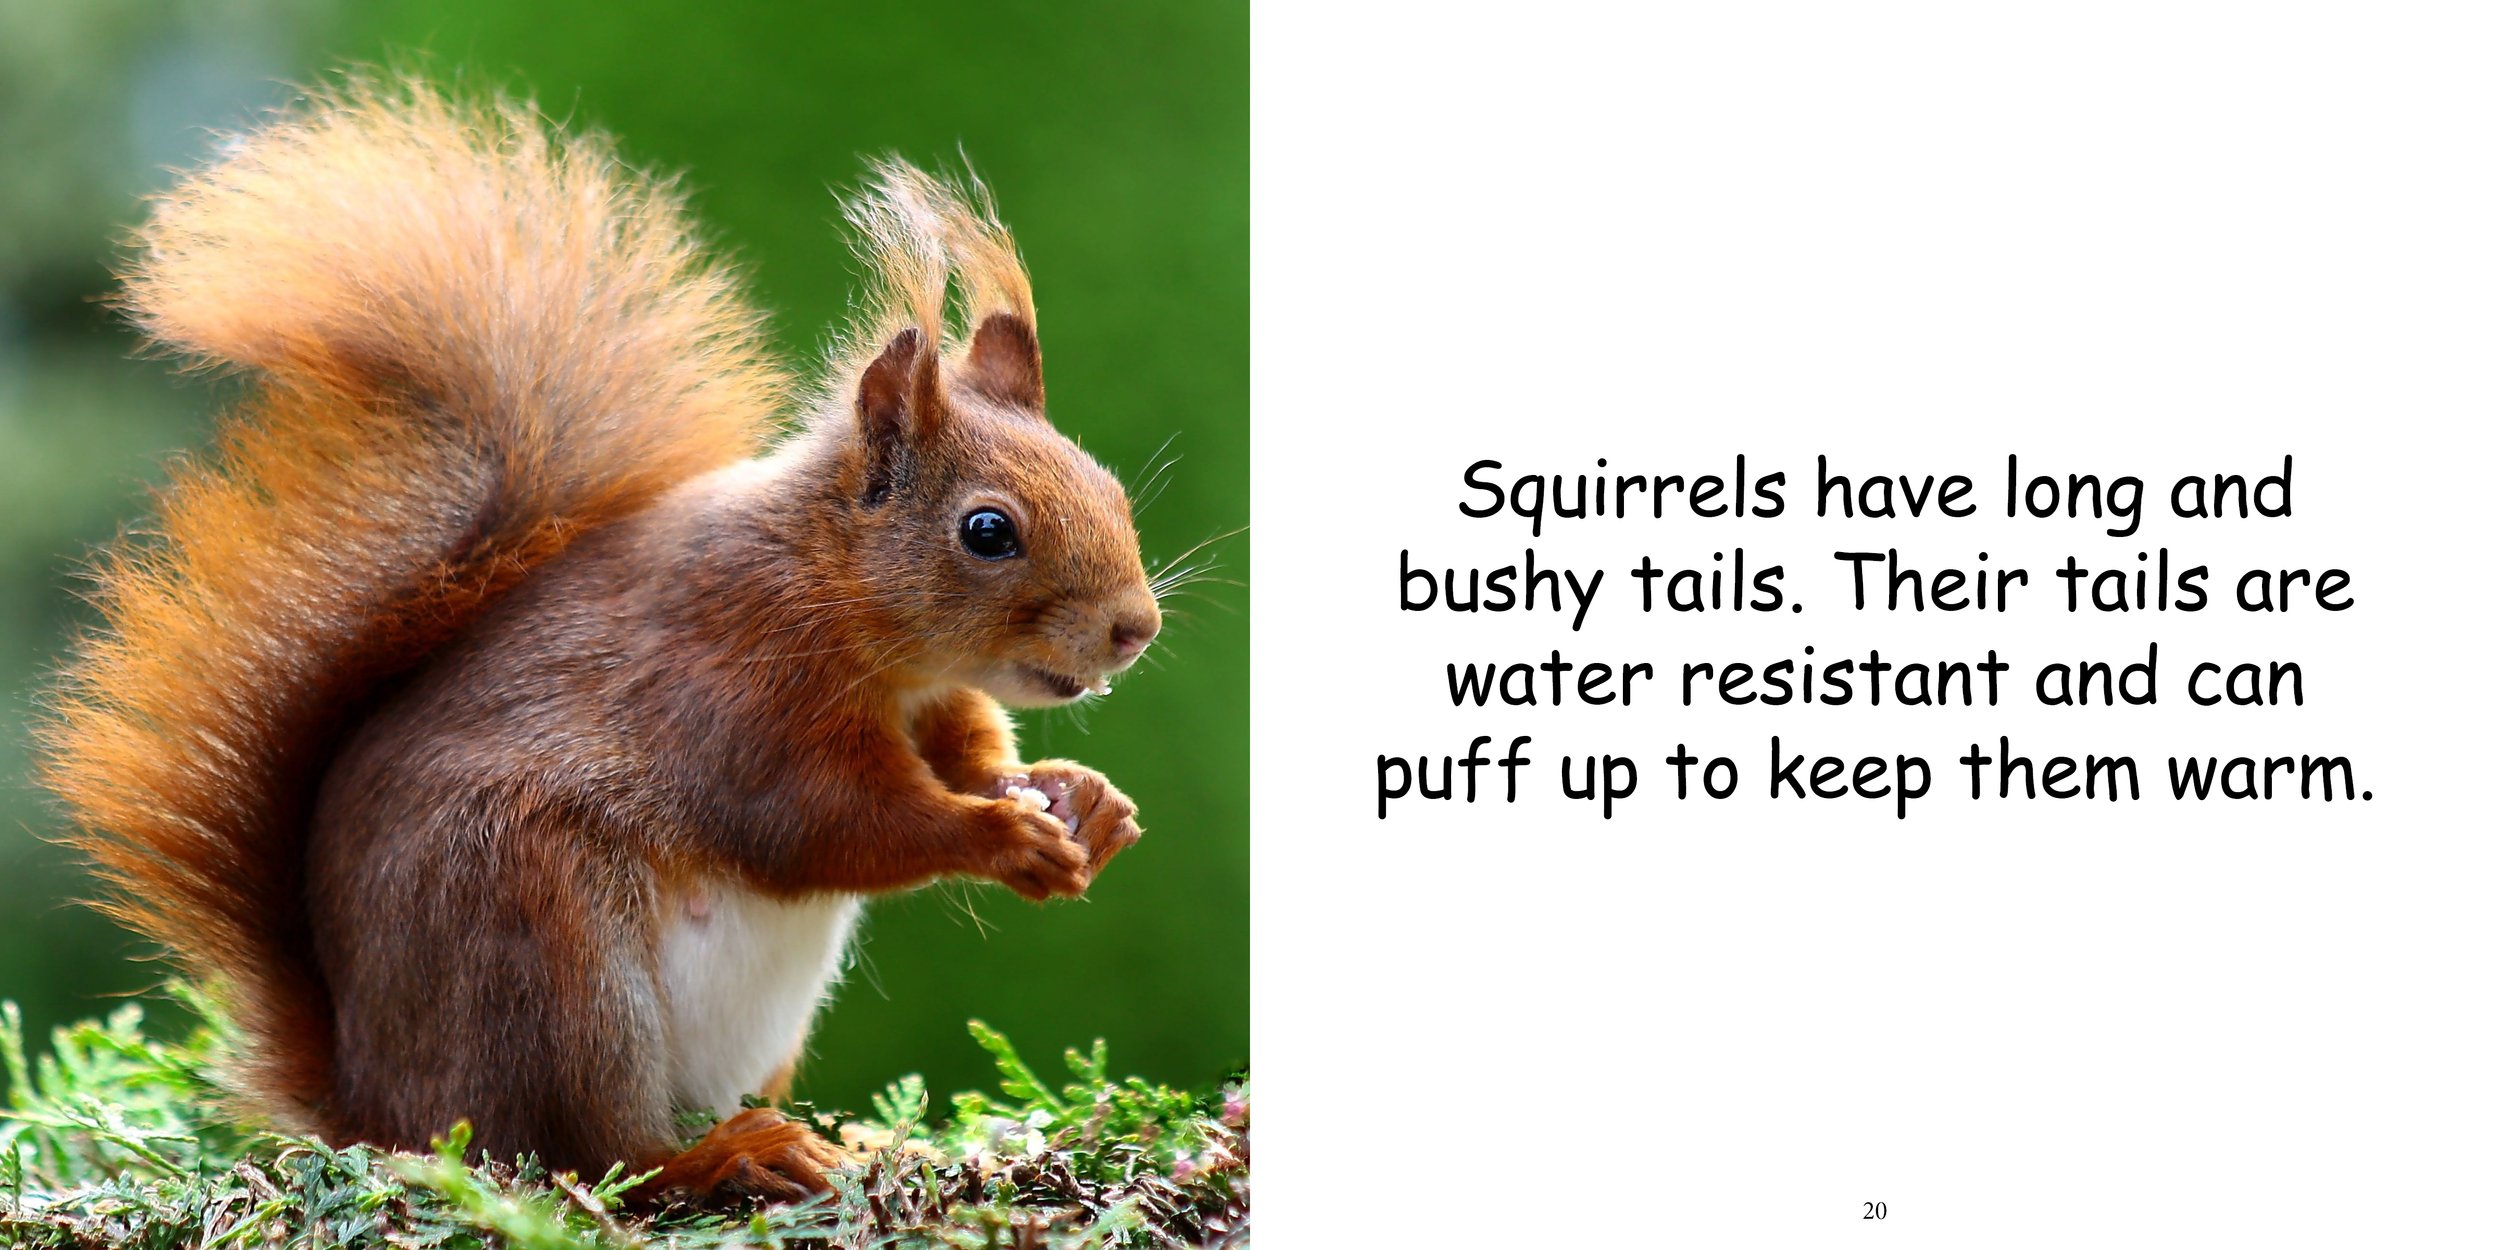 Everything about Squirrels14.jpg